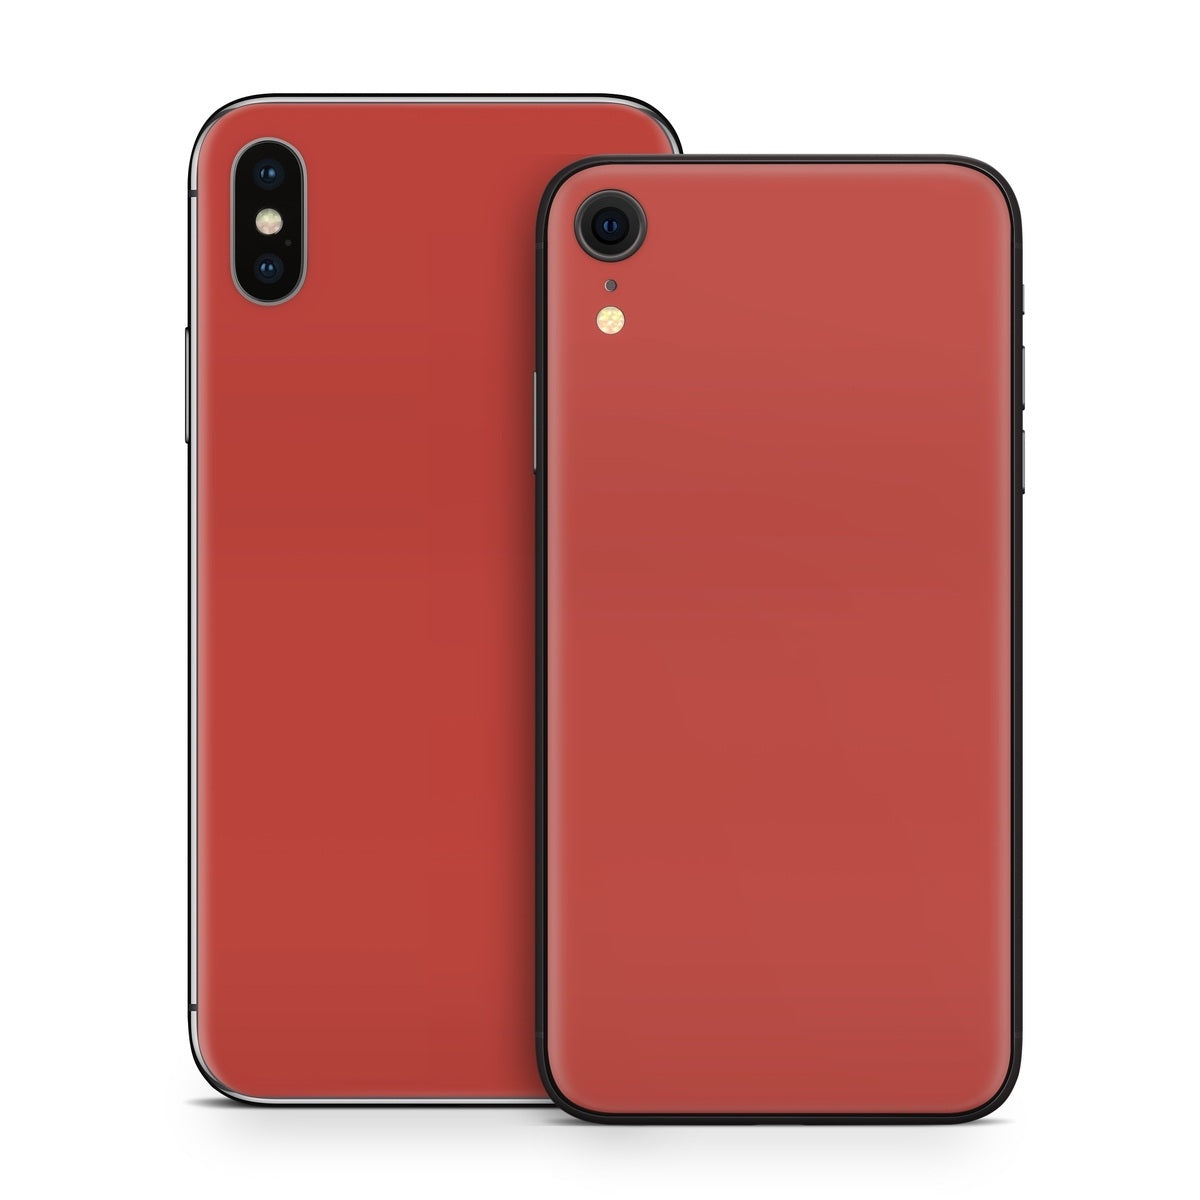 Solid State Berry - Apple iPhone X Skin